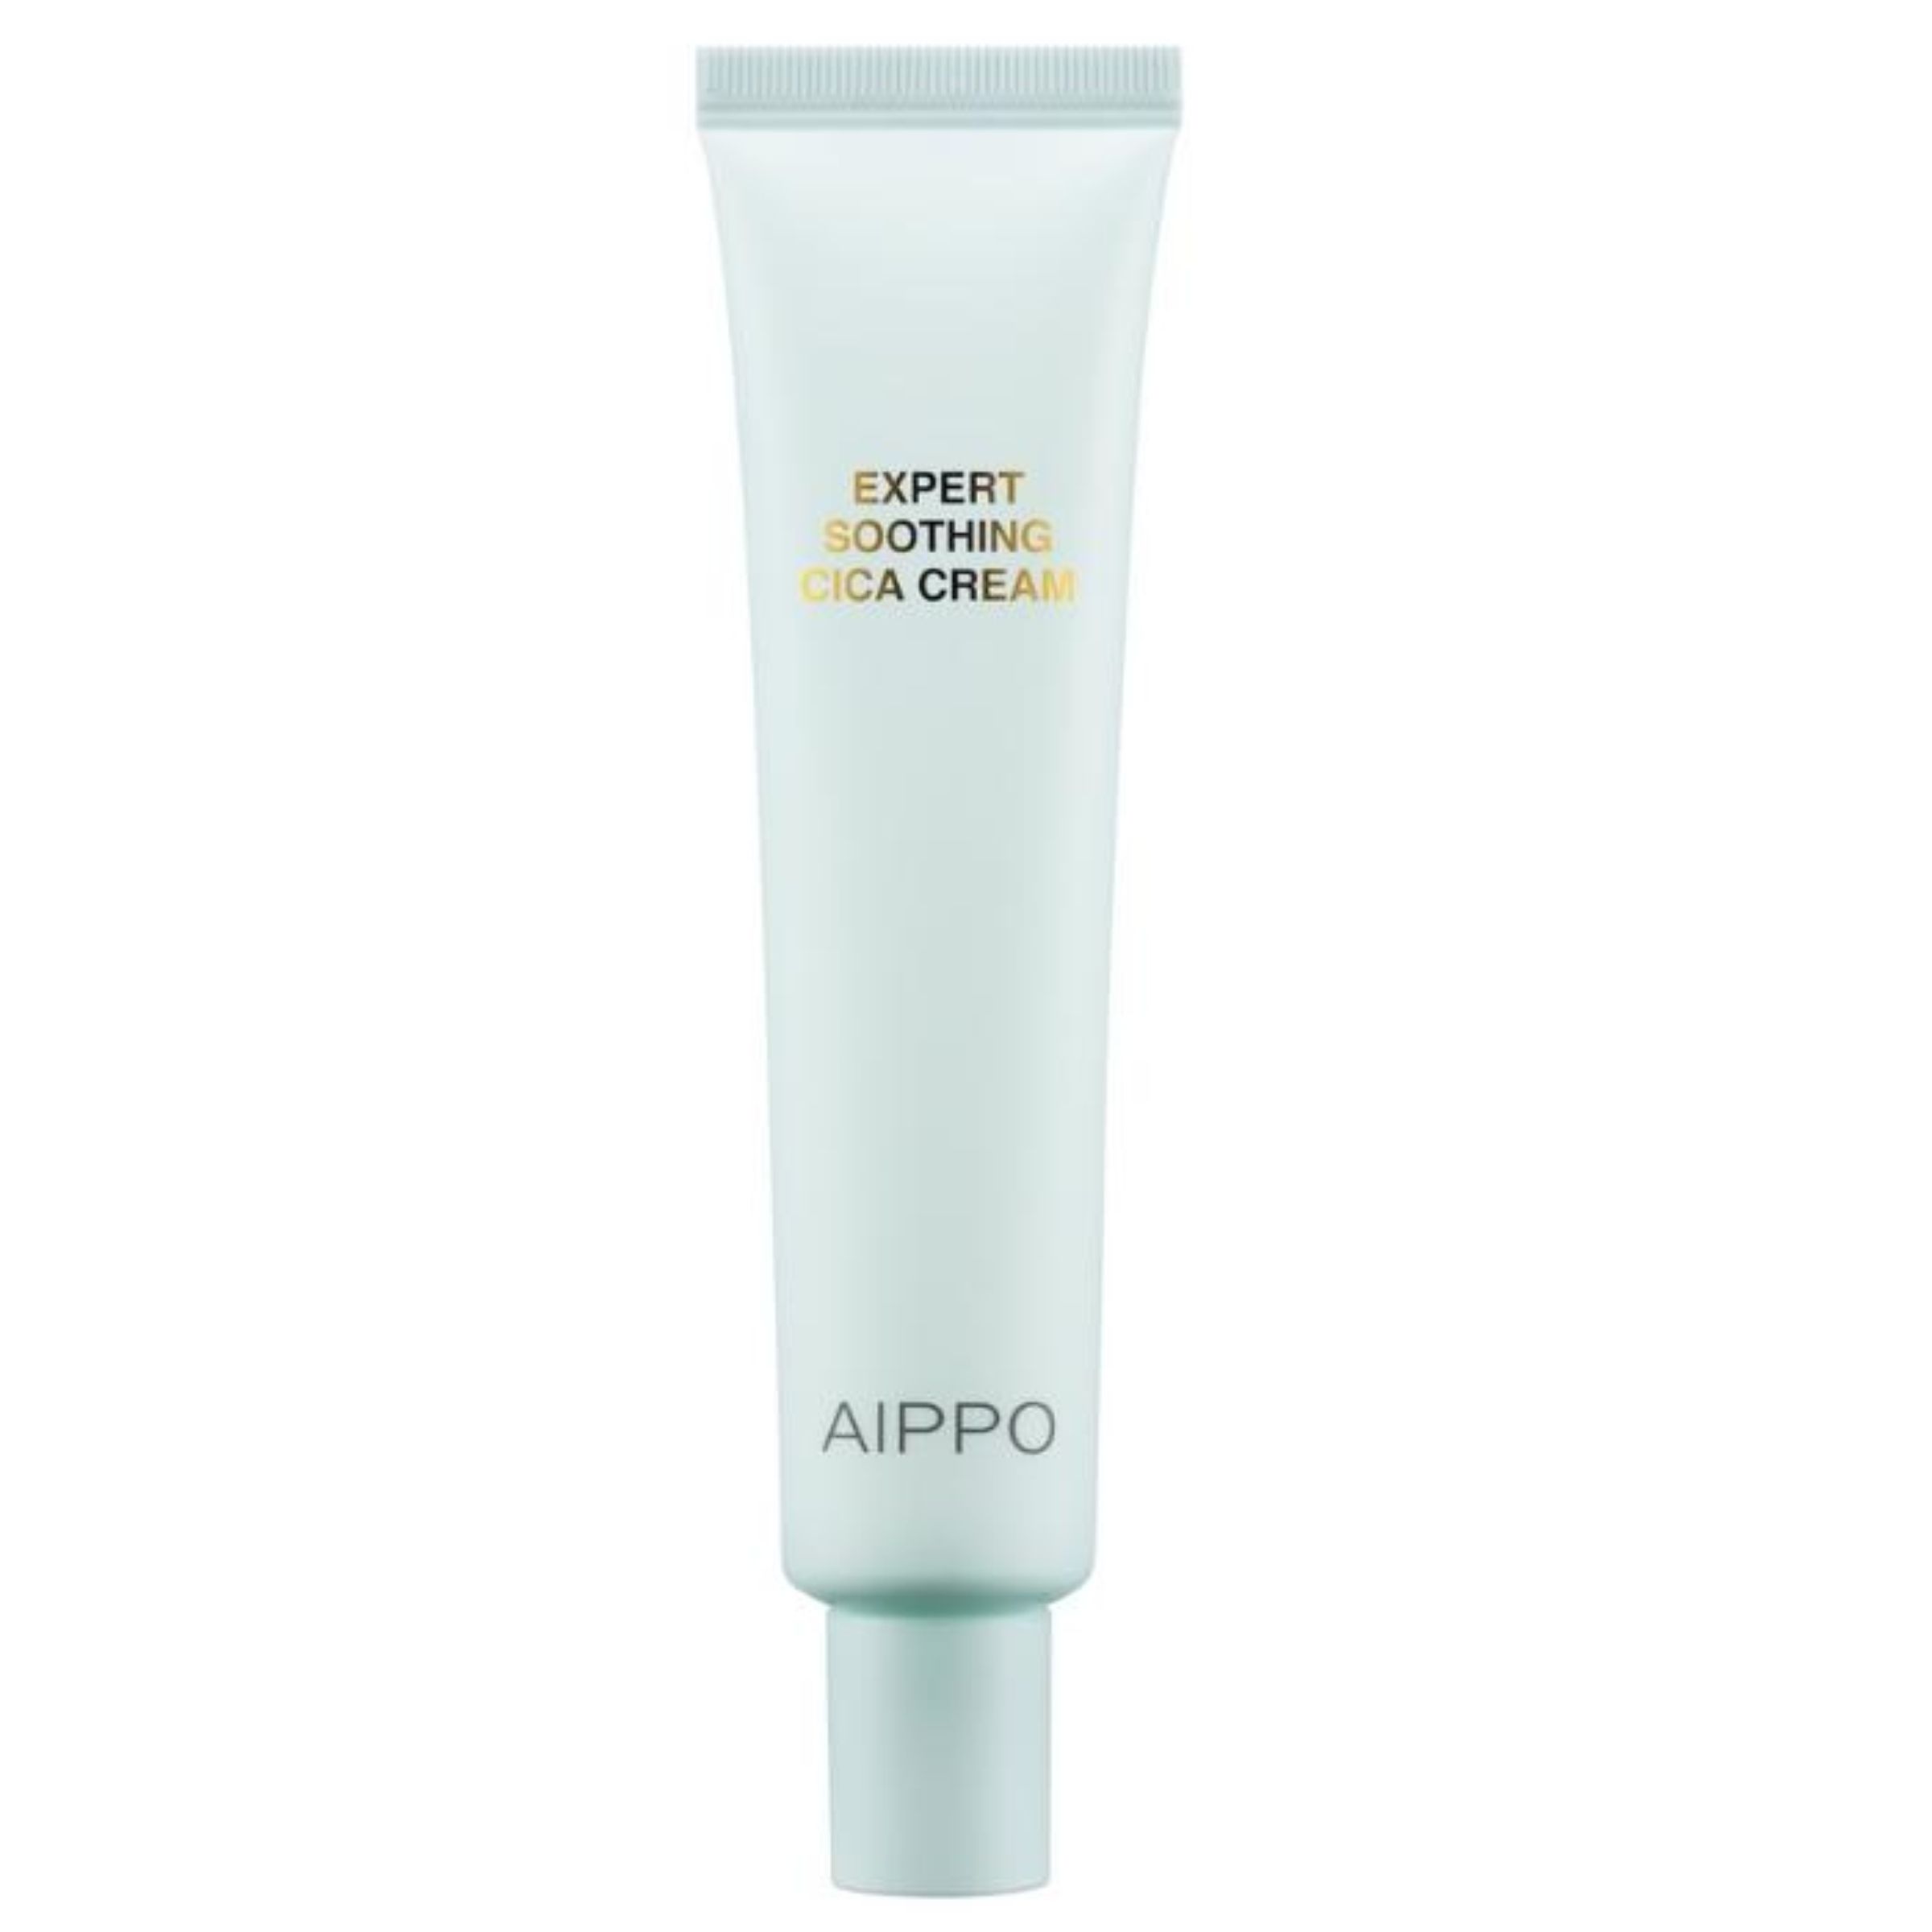 Aippo Seoul - Expert Soothing Cica Cream